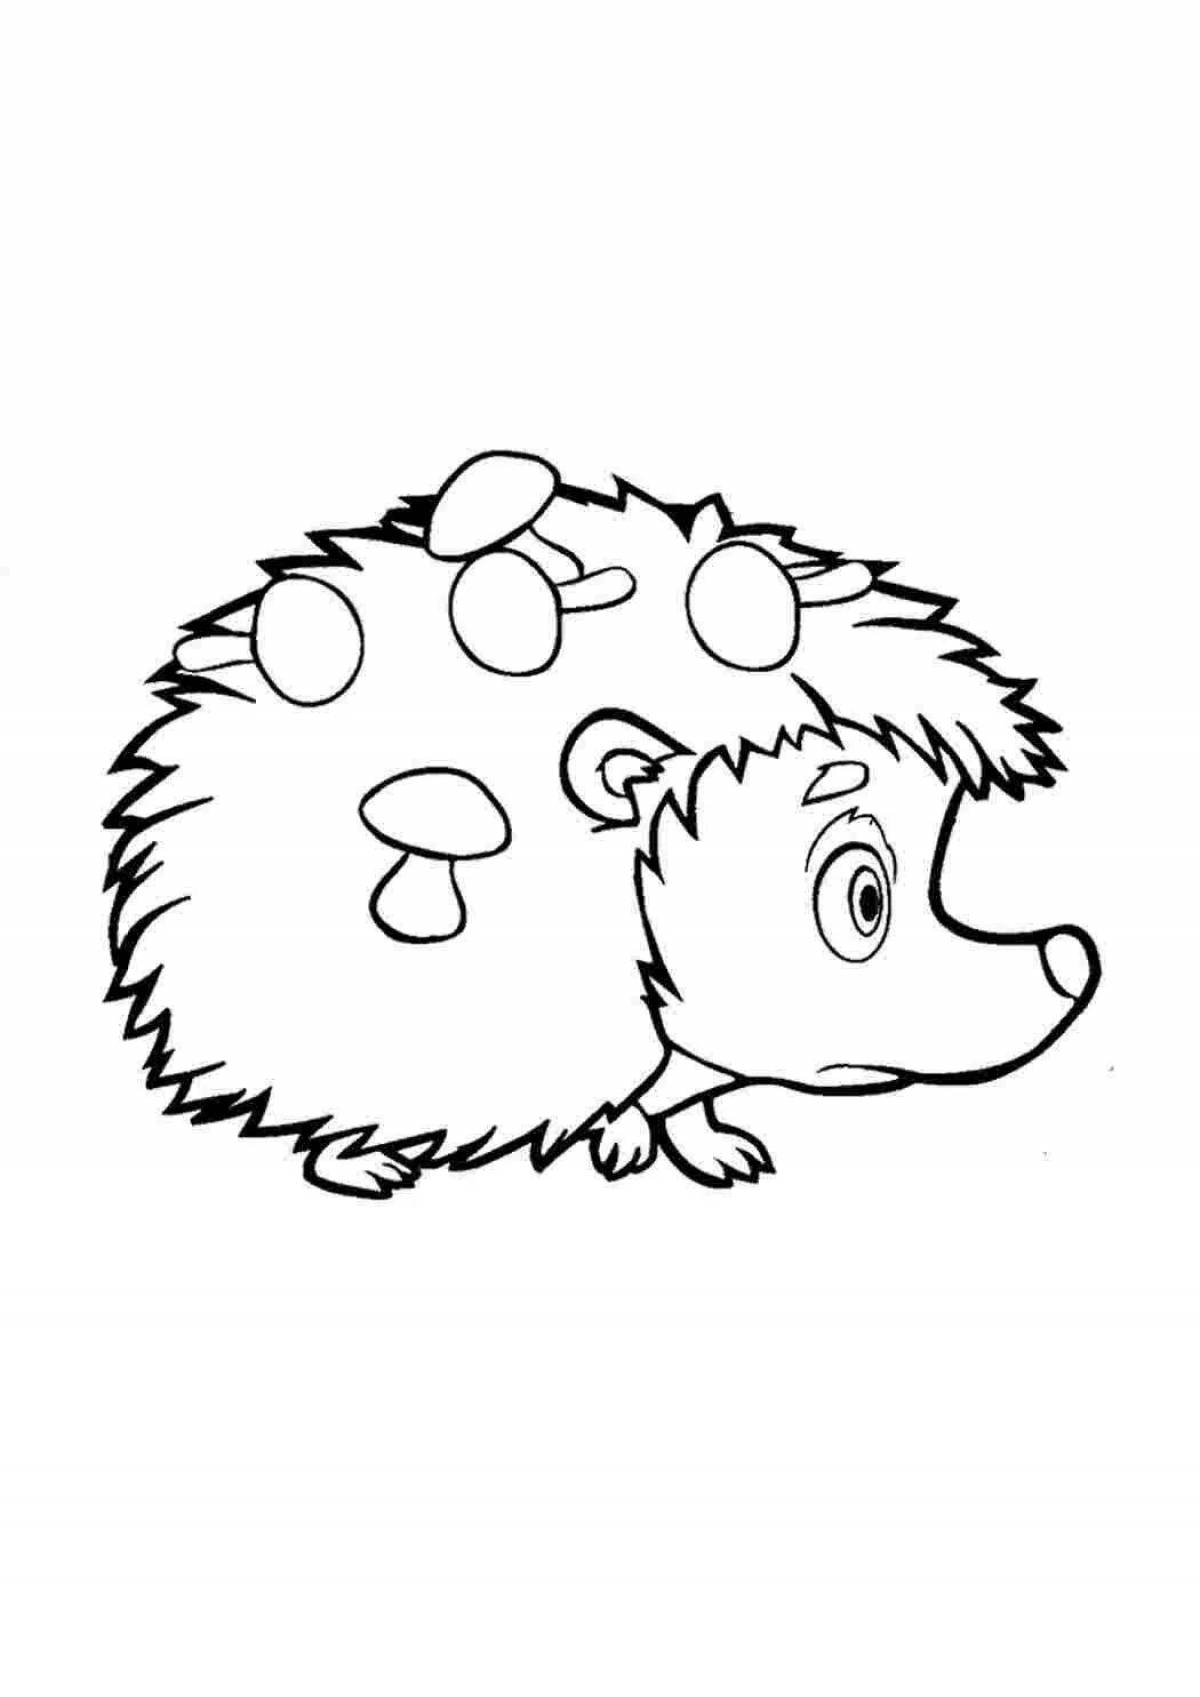 A witty drawing of a hedgehog